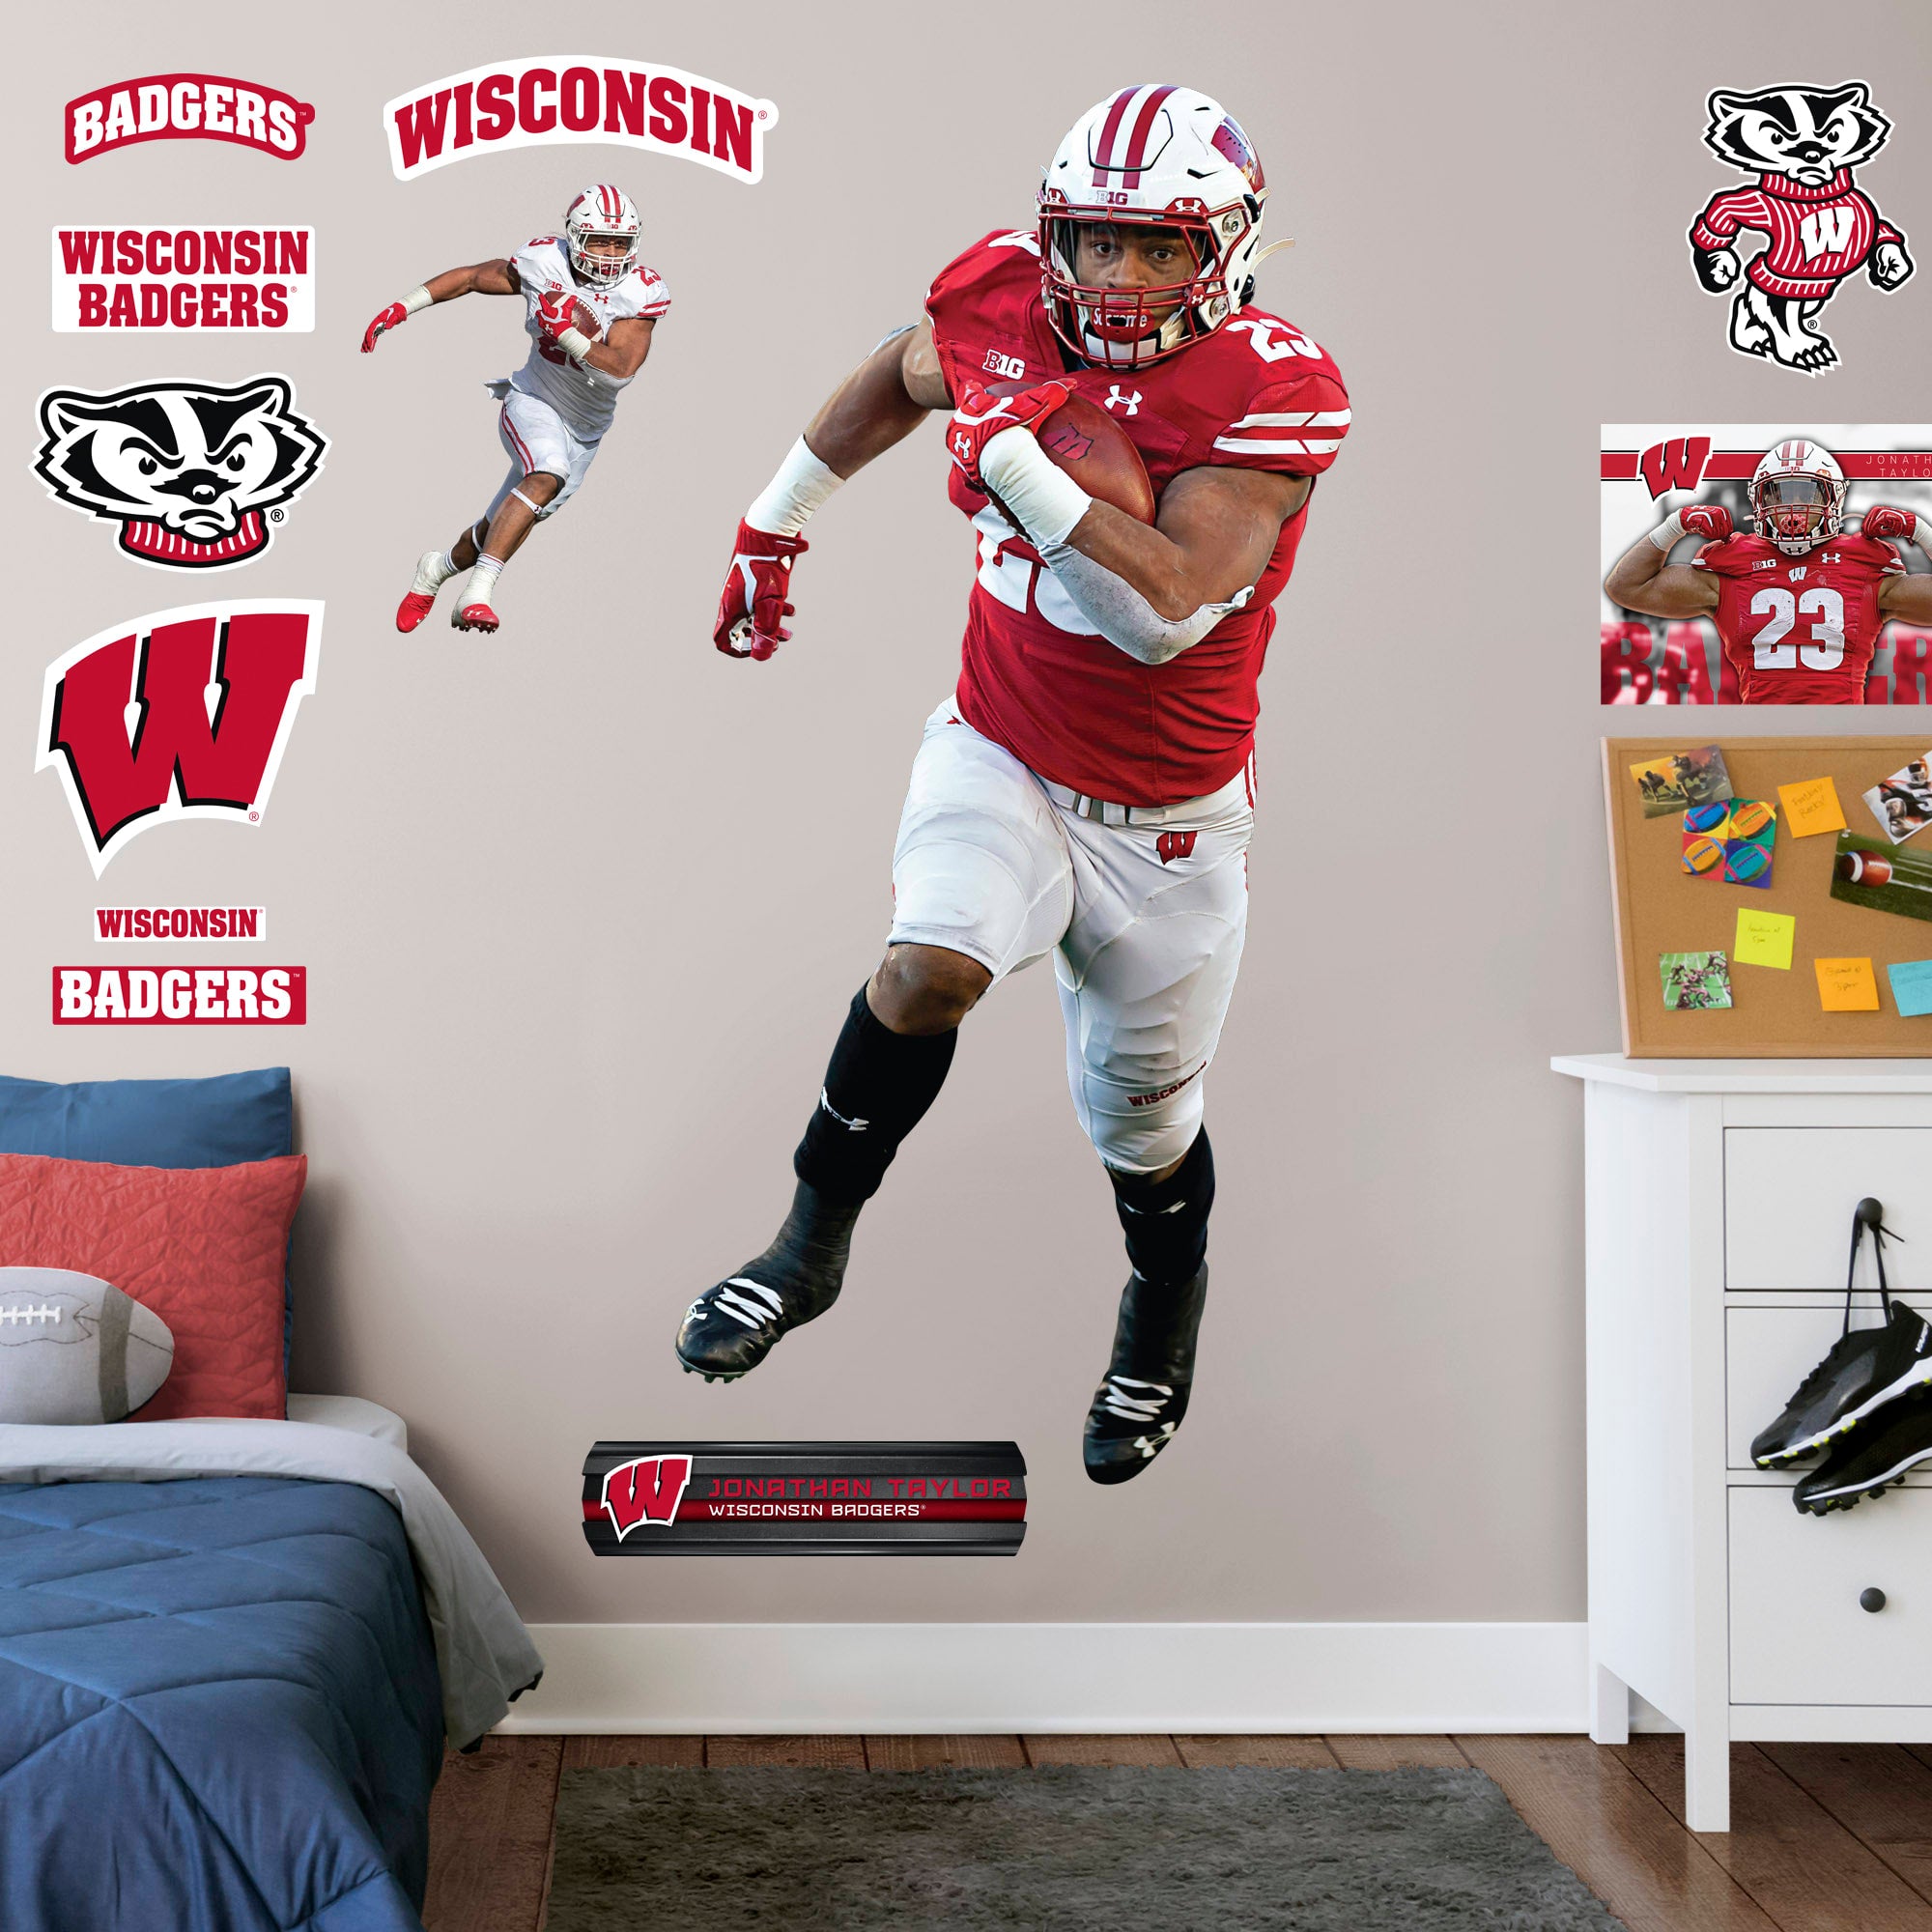 Jonathan Taylor for Wisconsin Badgers: Wisconsin - Officially Licensed Removable Wall Decal Life-Size Athlete + 13 Decals (37"W